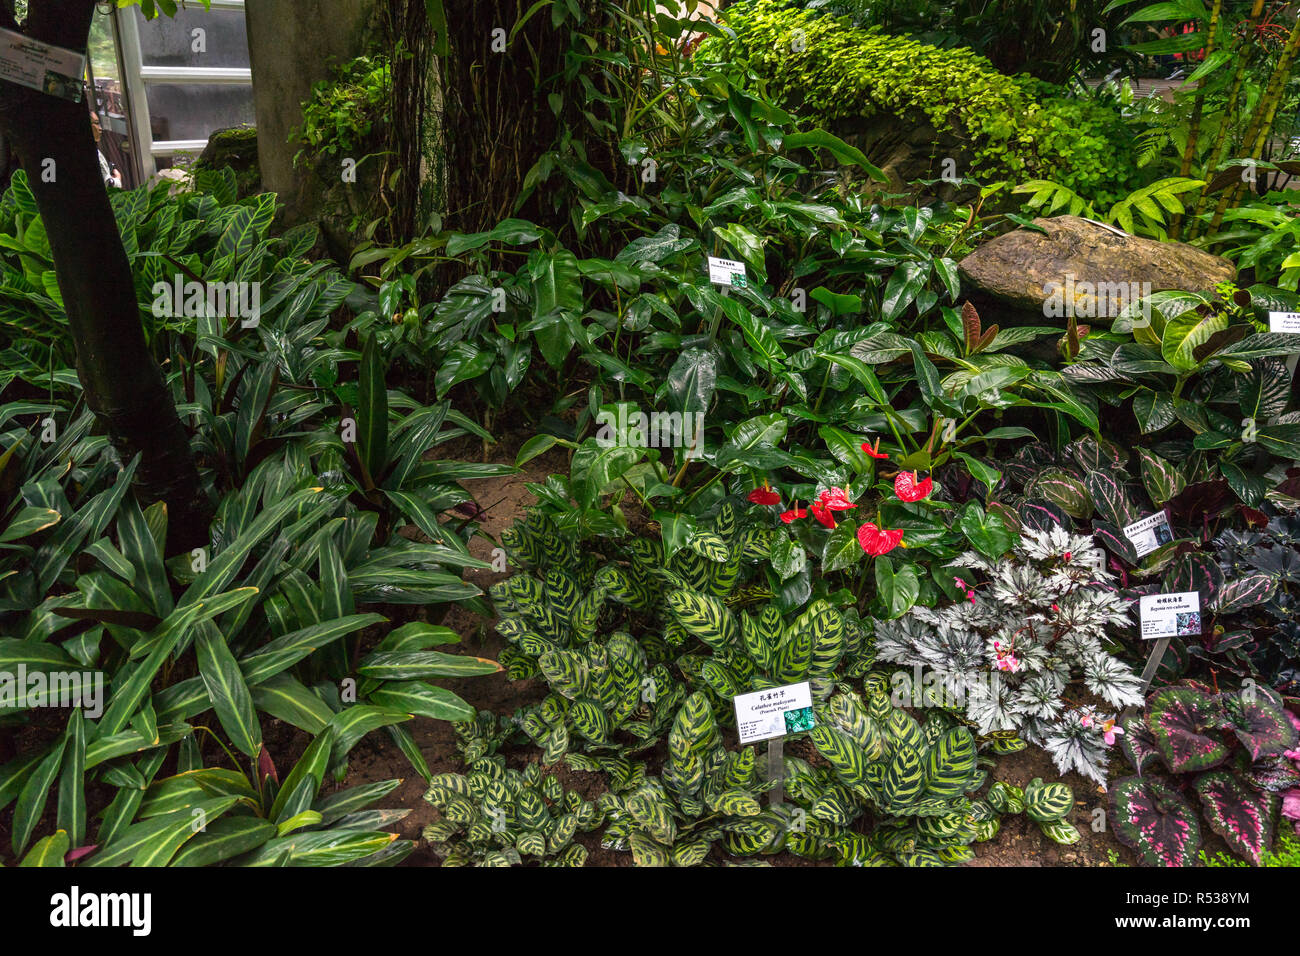 Forsgate Conservatory at the Hong Kong Park showing tropical plants and jungle foliage in the Humid Plant House Stock Photo